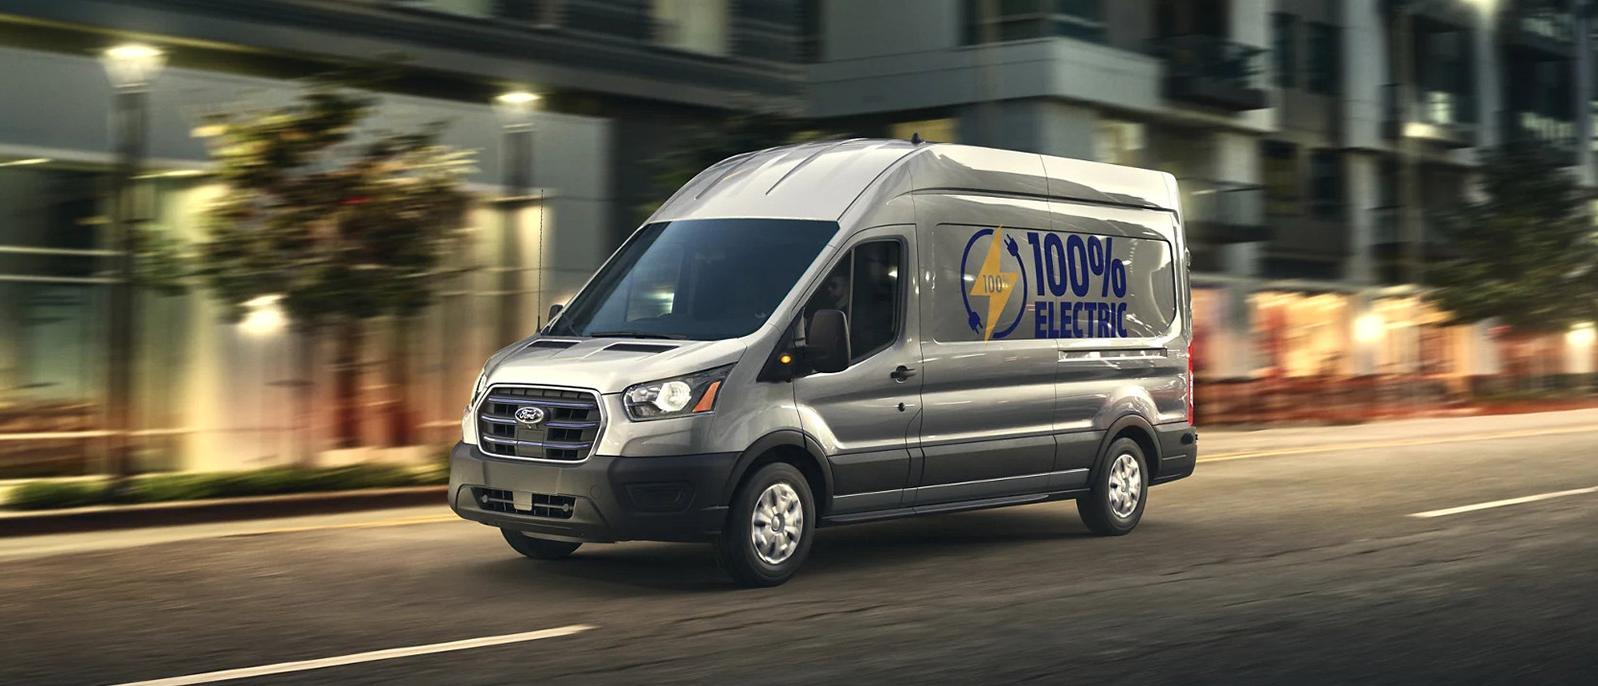 2022 Ford E-Transit is running on the road.